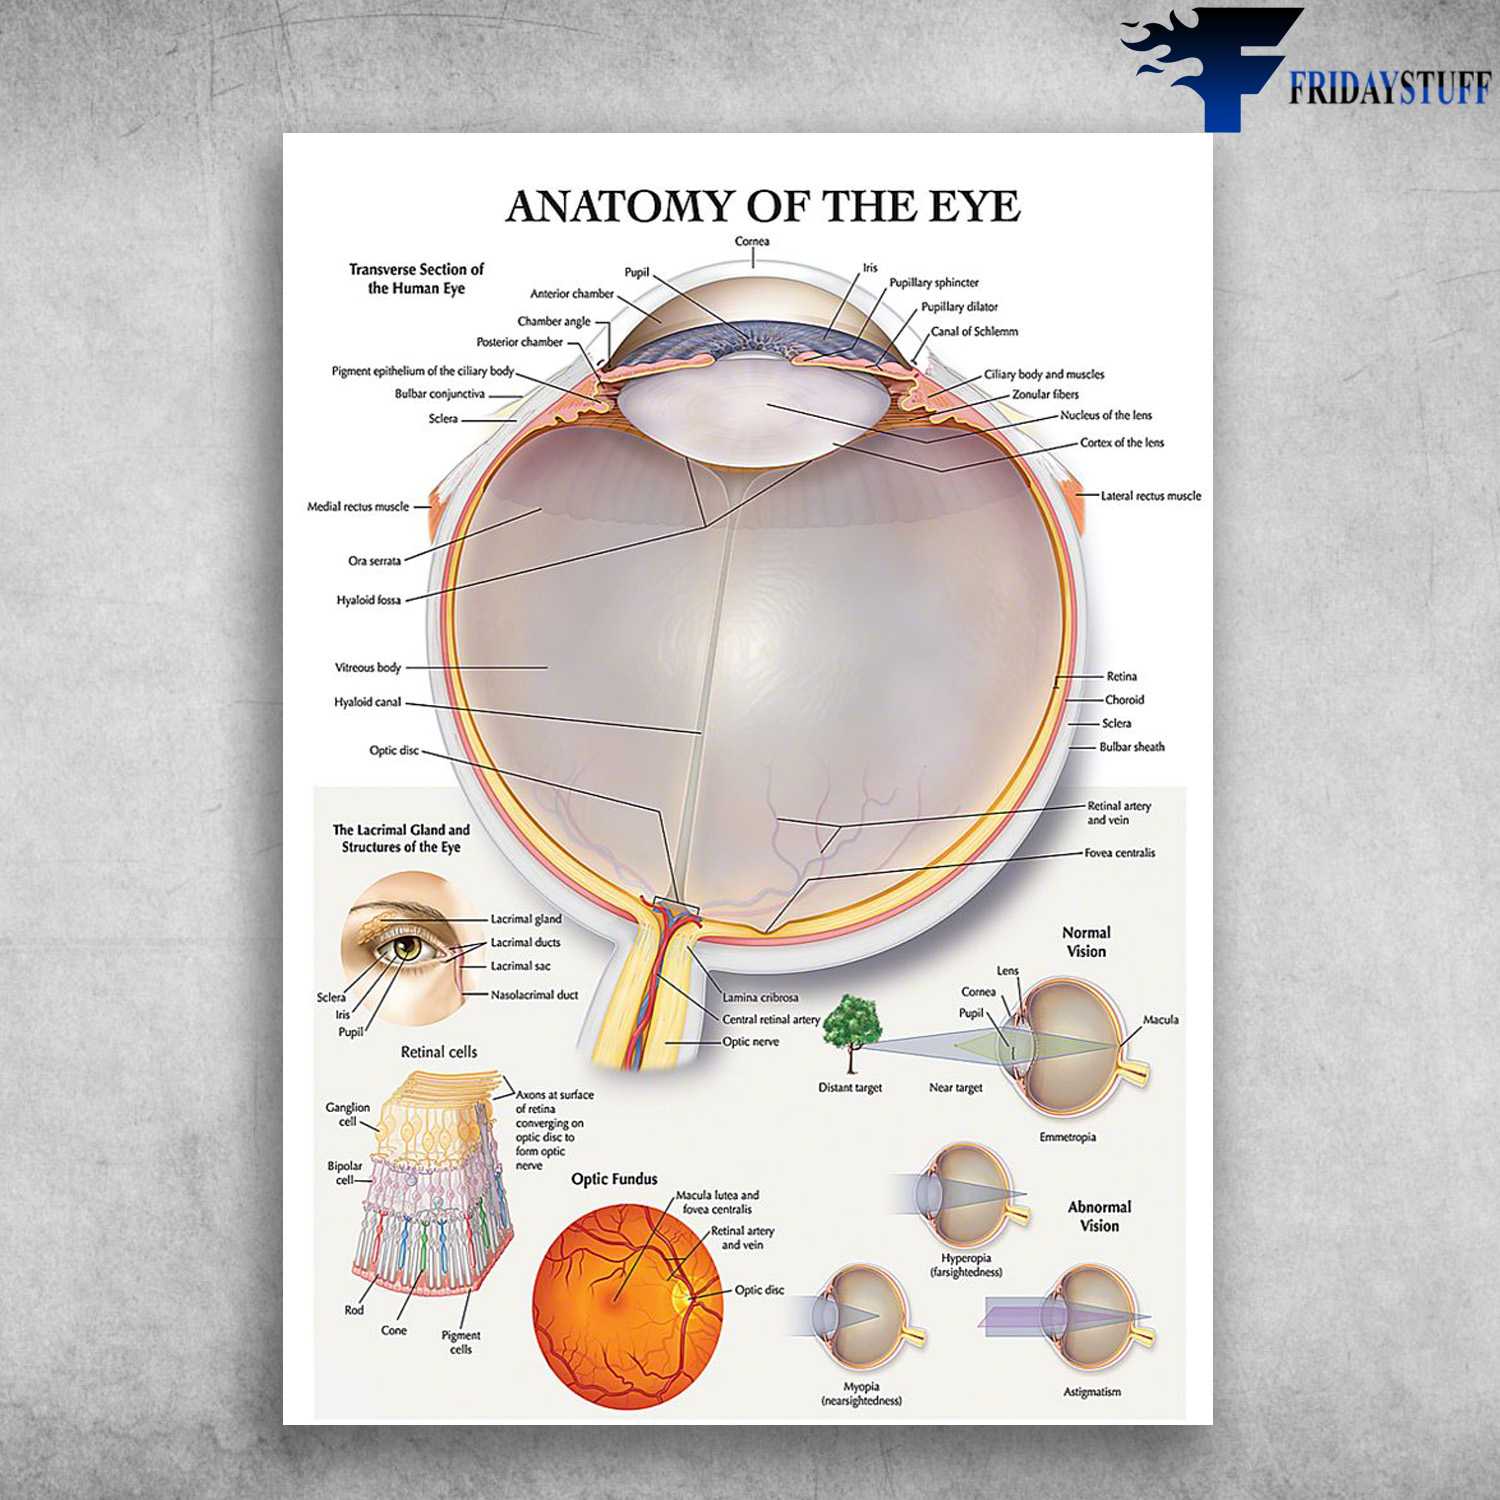 Manatomy Of The Eye, Eye Knowledge - Transverse Section Of The Human Eye, The Lacrimal Gland And Structures Of The Eye, Optic Fundus, Retinal Cells